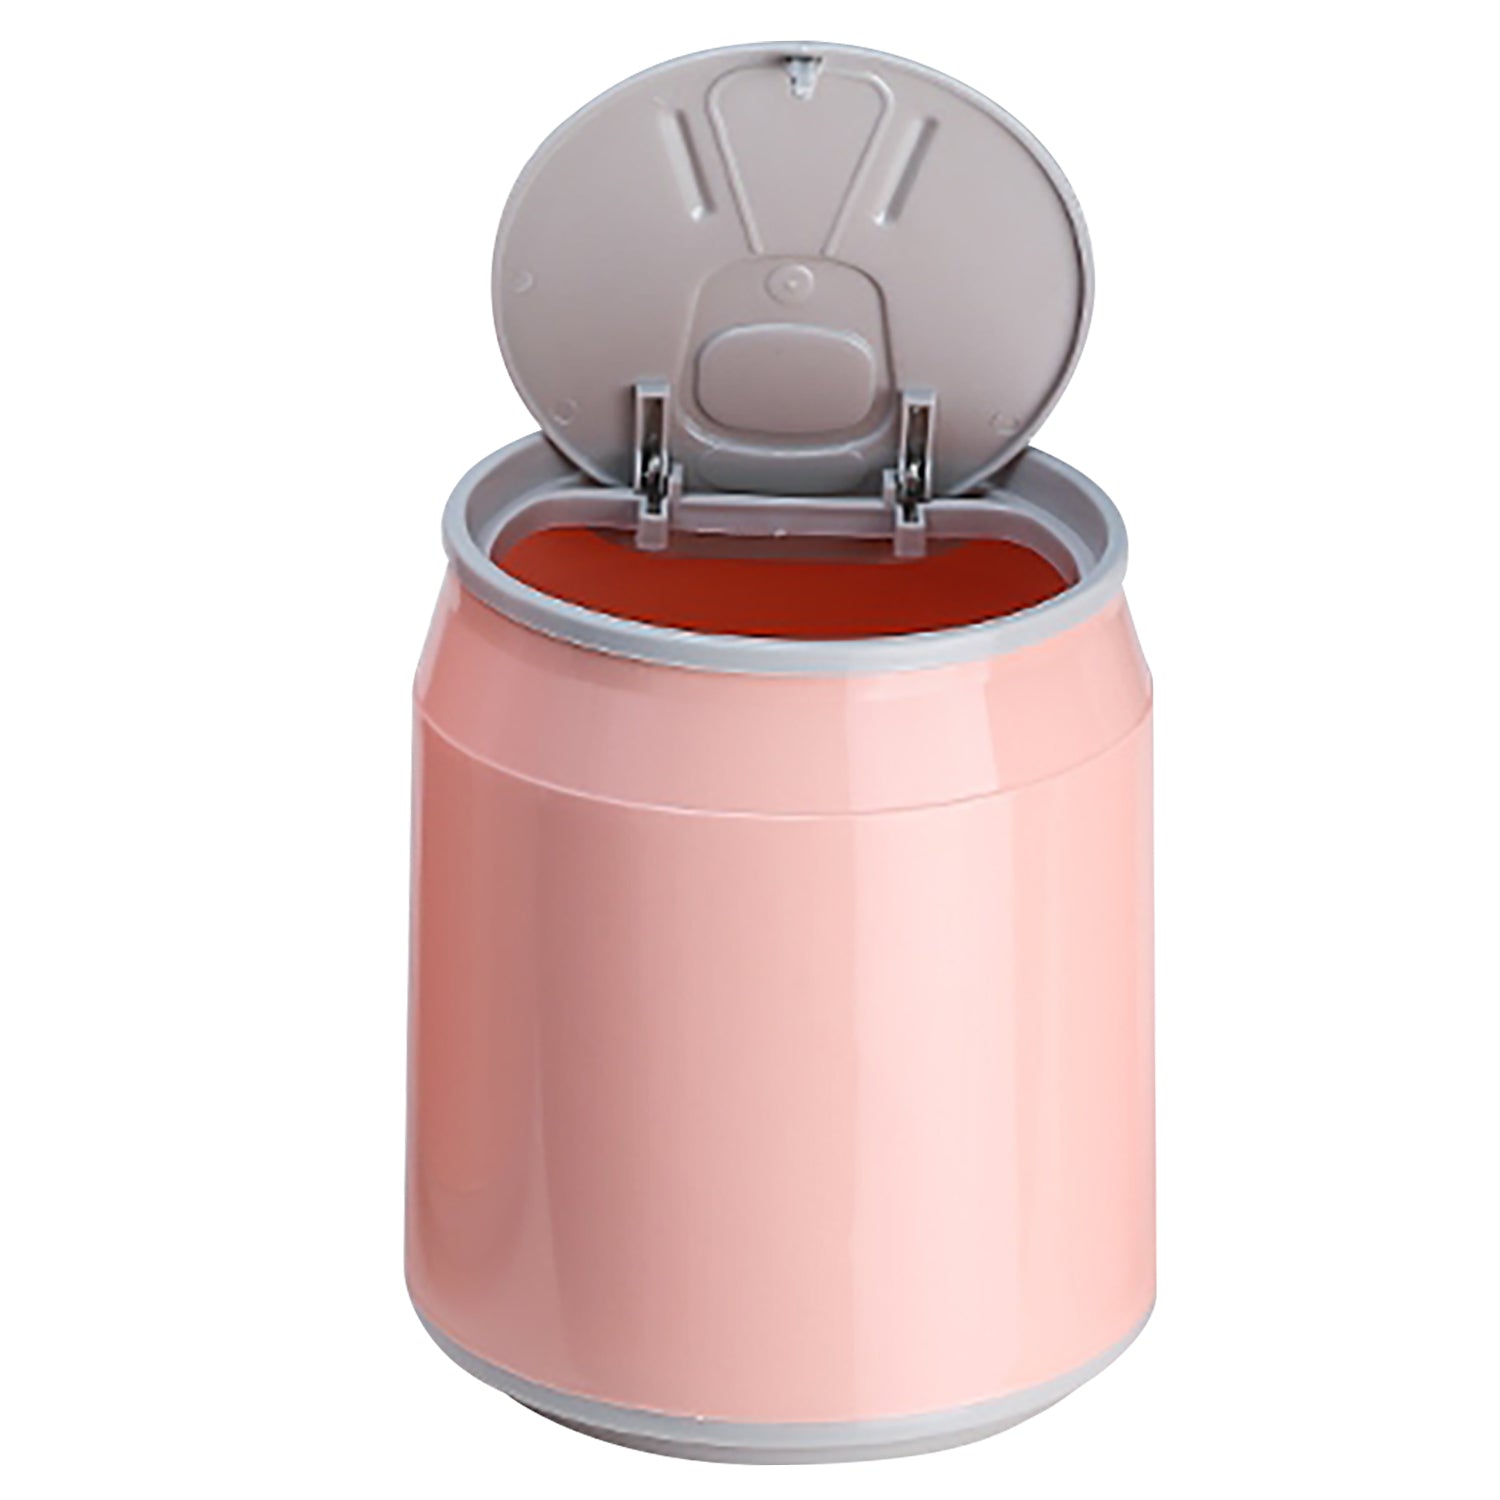 Load image into Gallery viewer, Push-Top Oversized Soda Can Trash Bin | Cute Soda Can Desk Bucket Storage With Pop Top